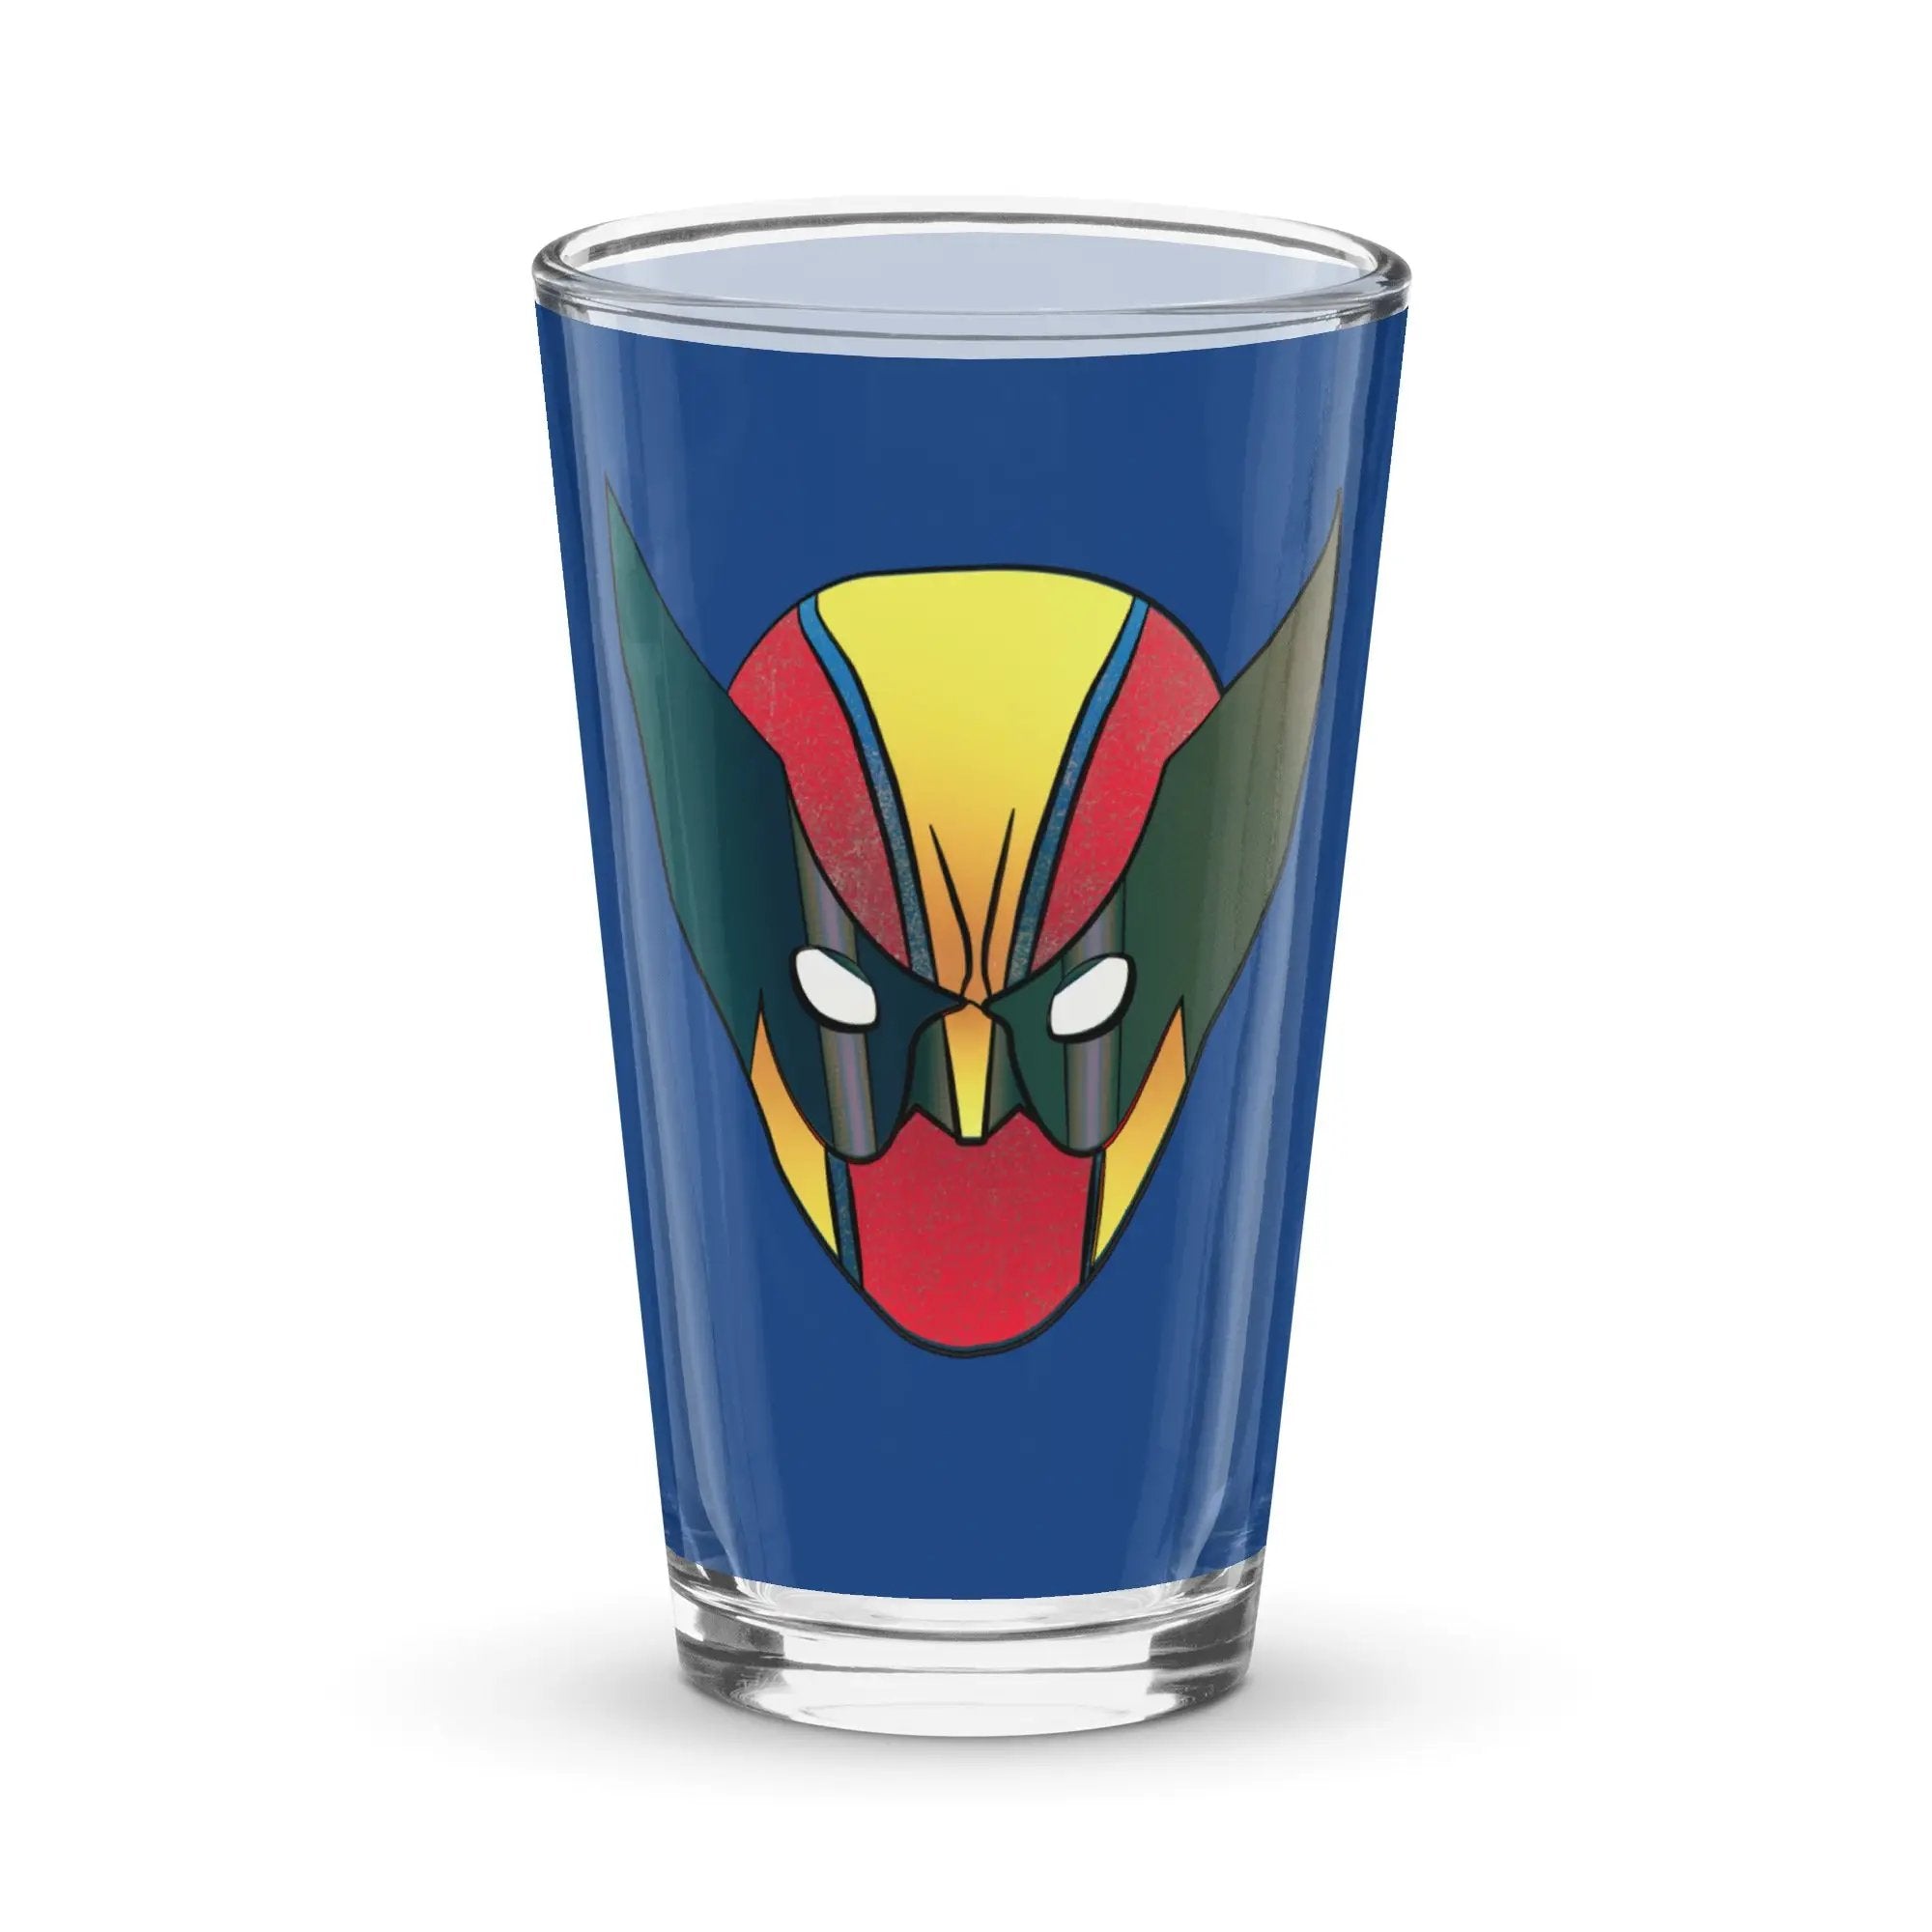 a shot glass with a wolverine face on it